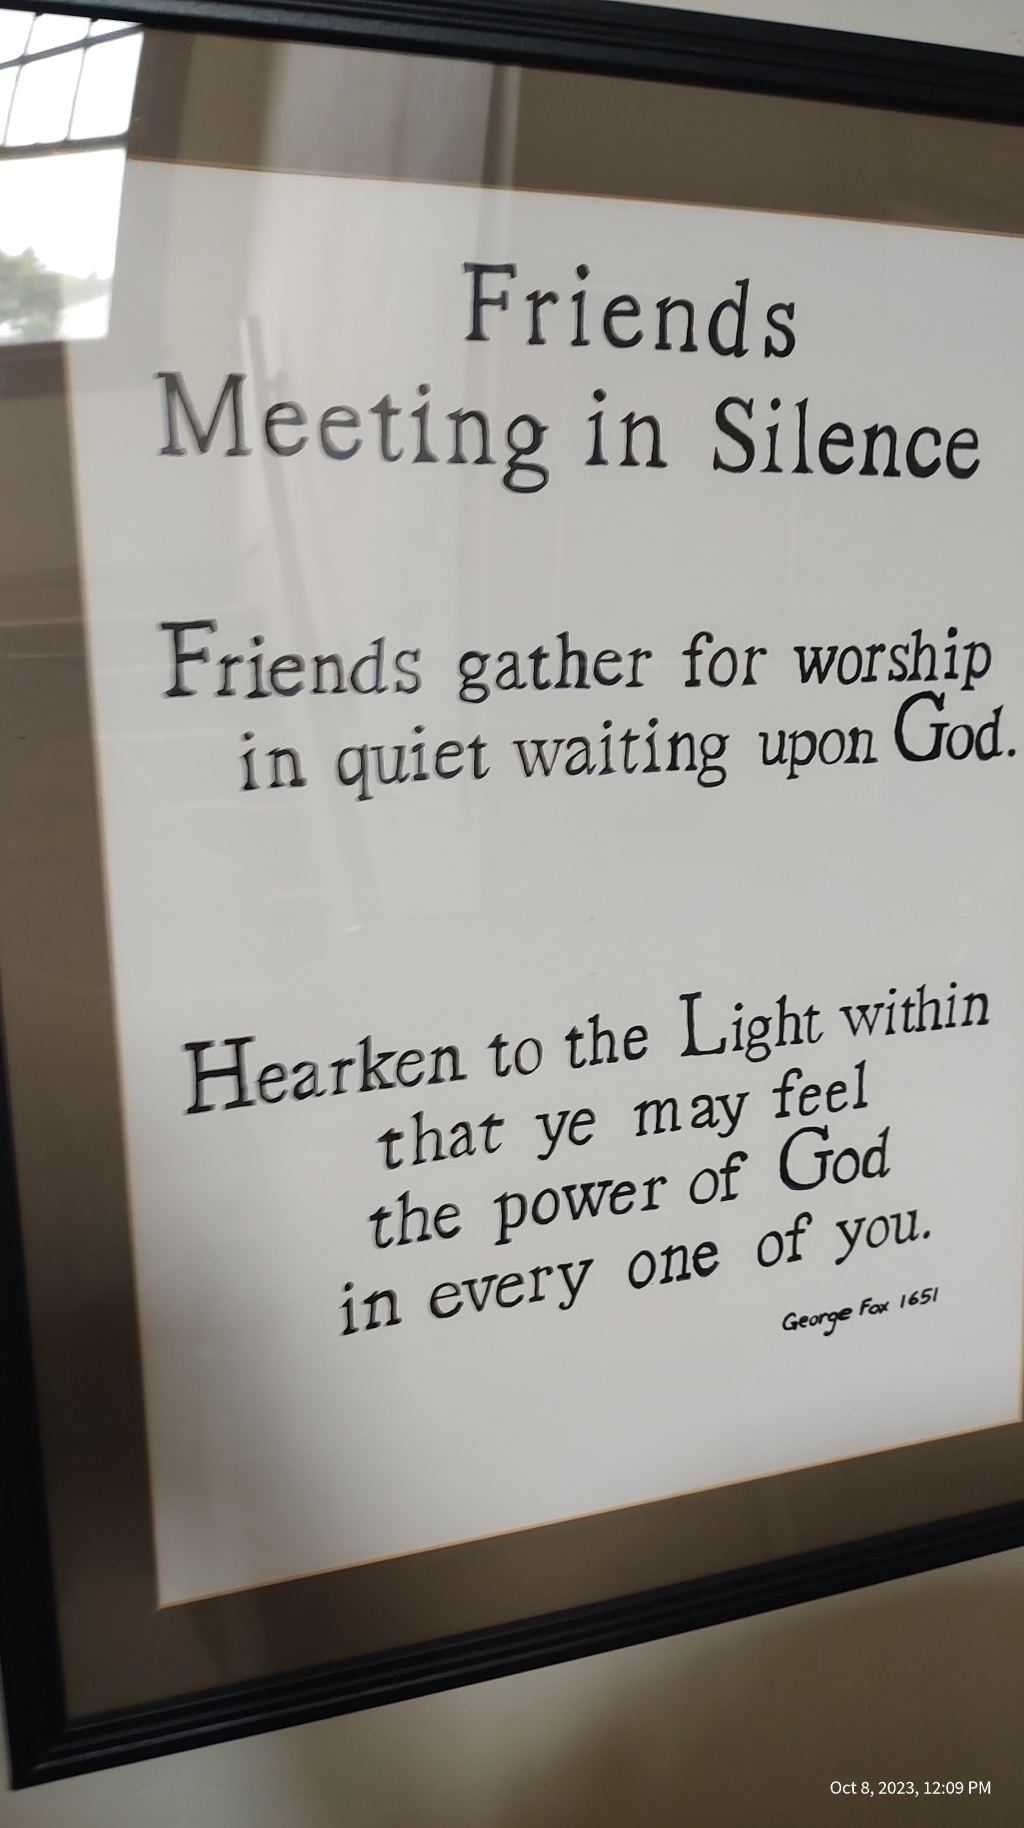 Framed image with the words Friends meeting in silence. Friends gather for worship in quiet waiting upon God. Hearken to the Light within that ye may feel the power of God in every one of you.